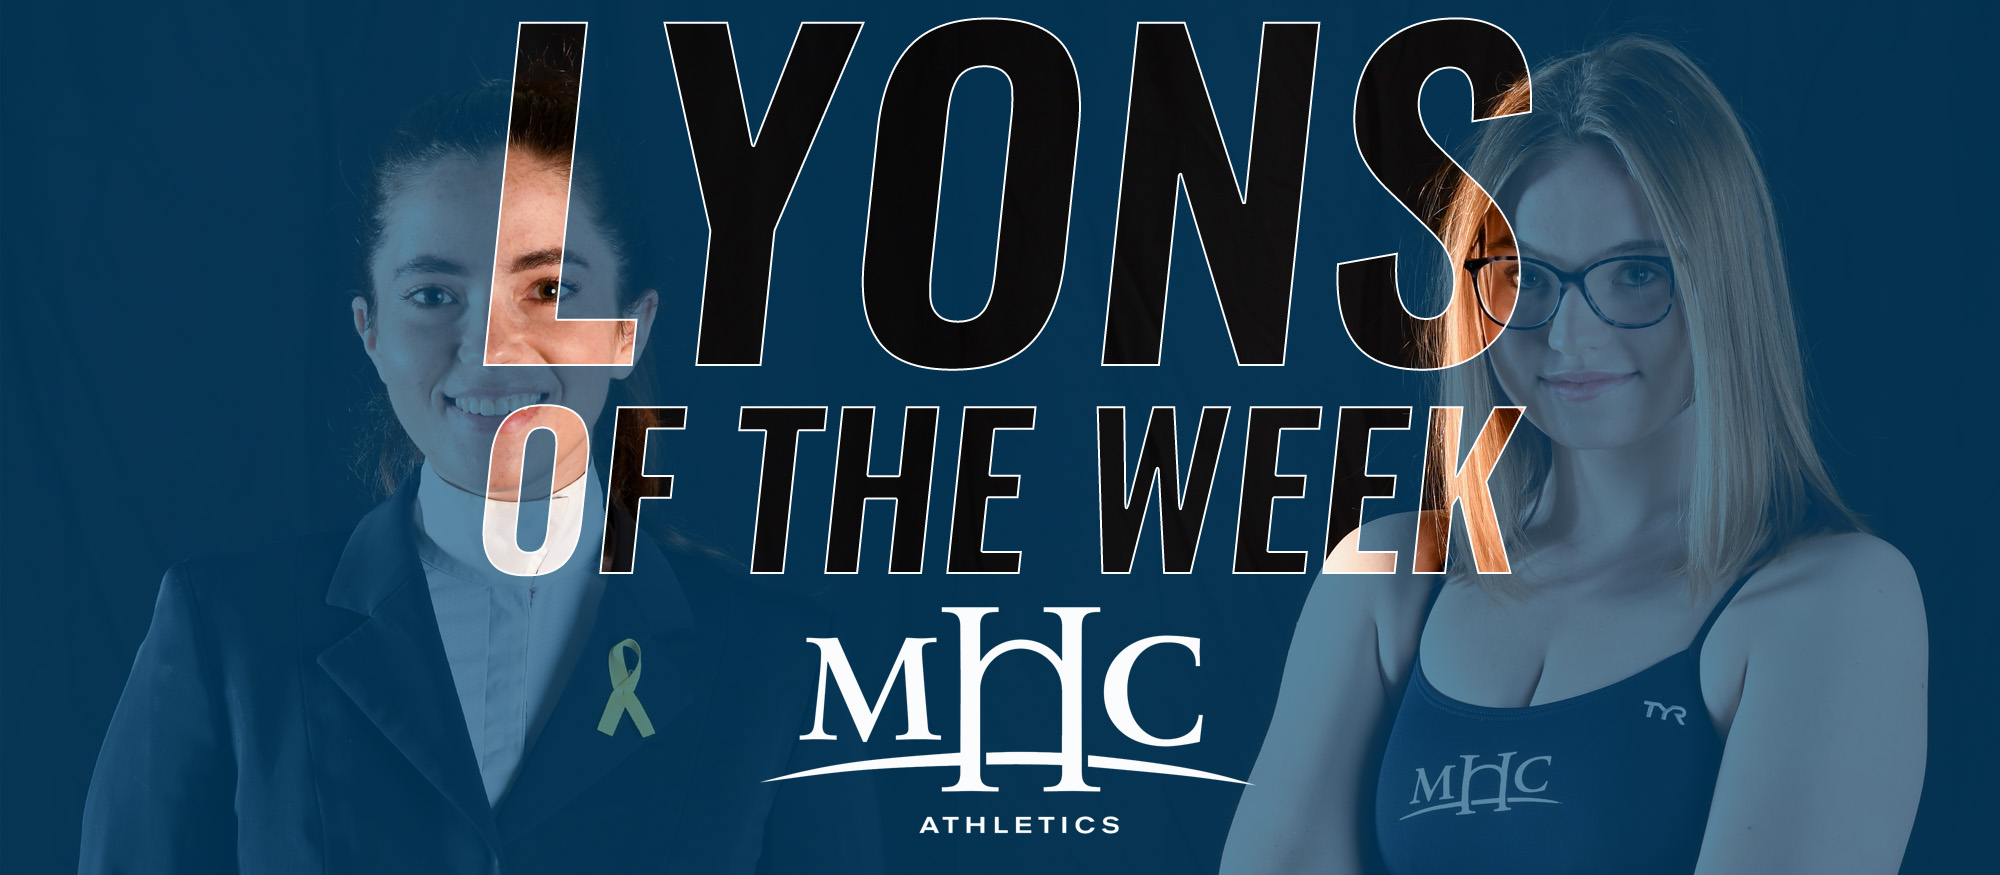 Fish and Heierhoff Named Lyons of the Week